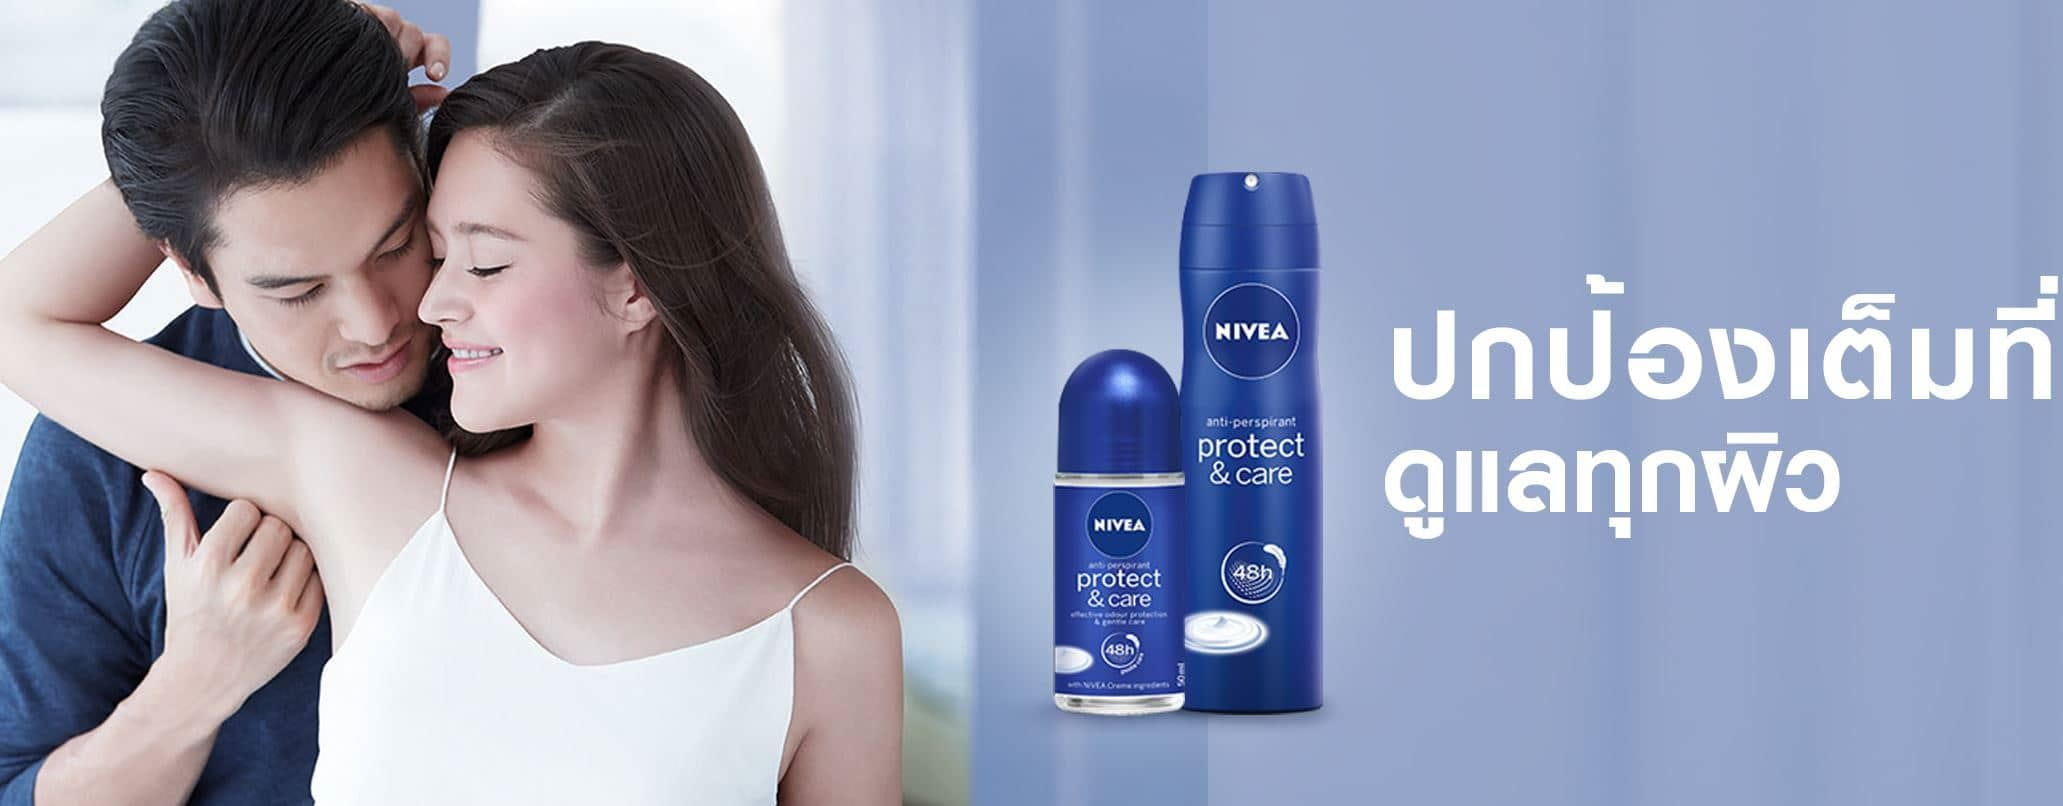 NIVEA protect and care banner